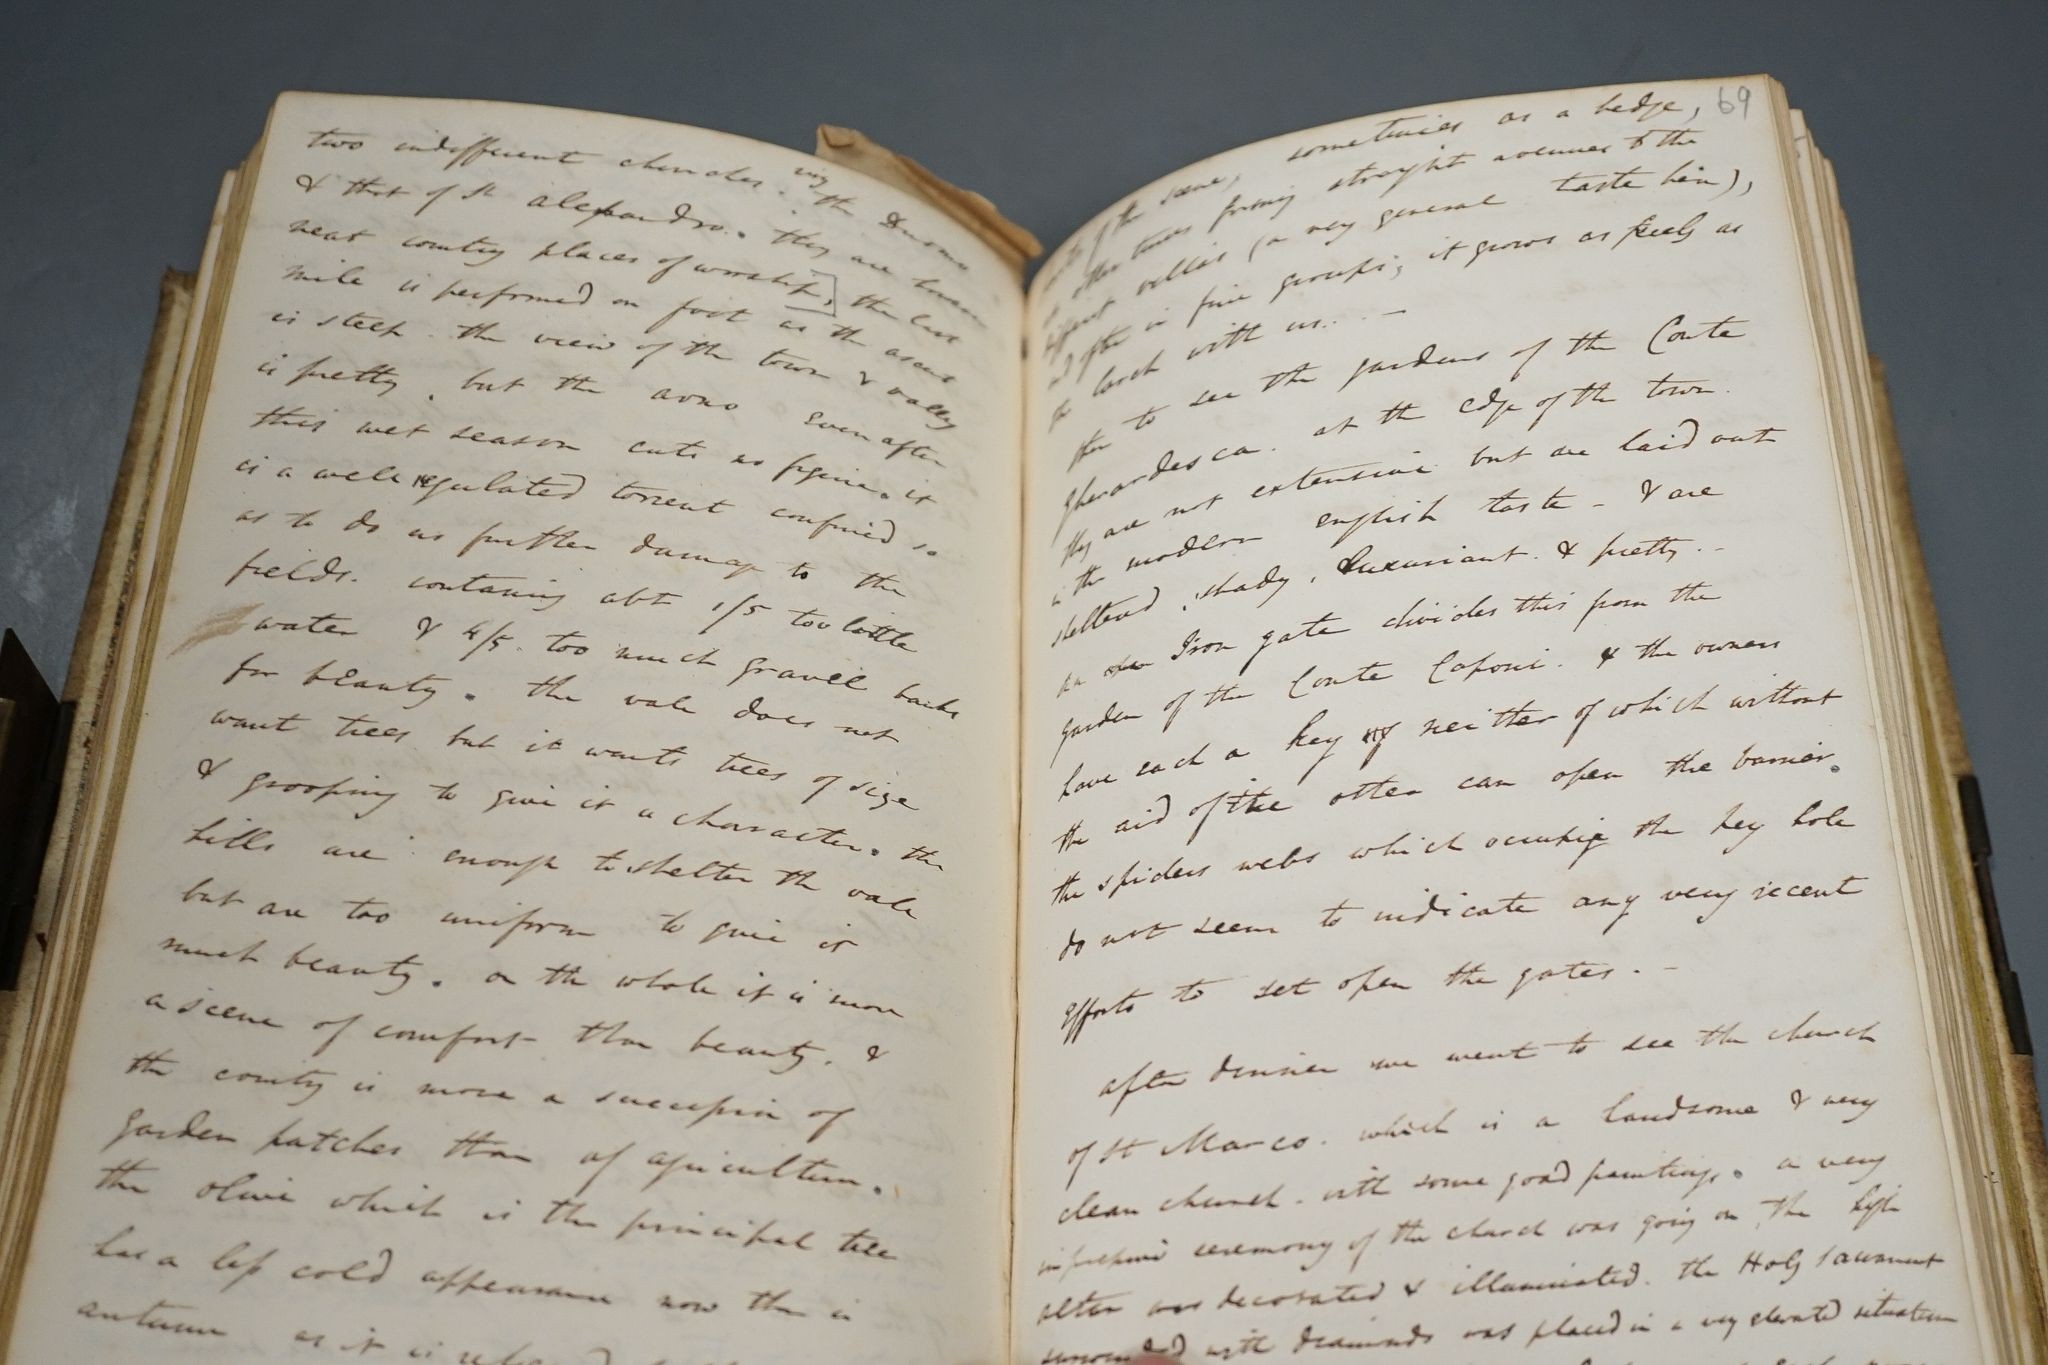 An early 19th century vellum bound hand-written account of a Grand Tour c.1830